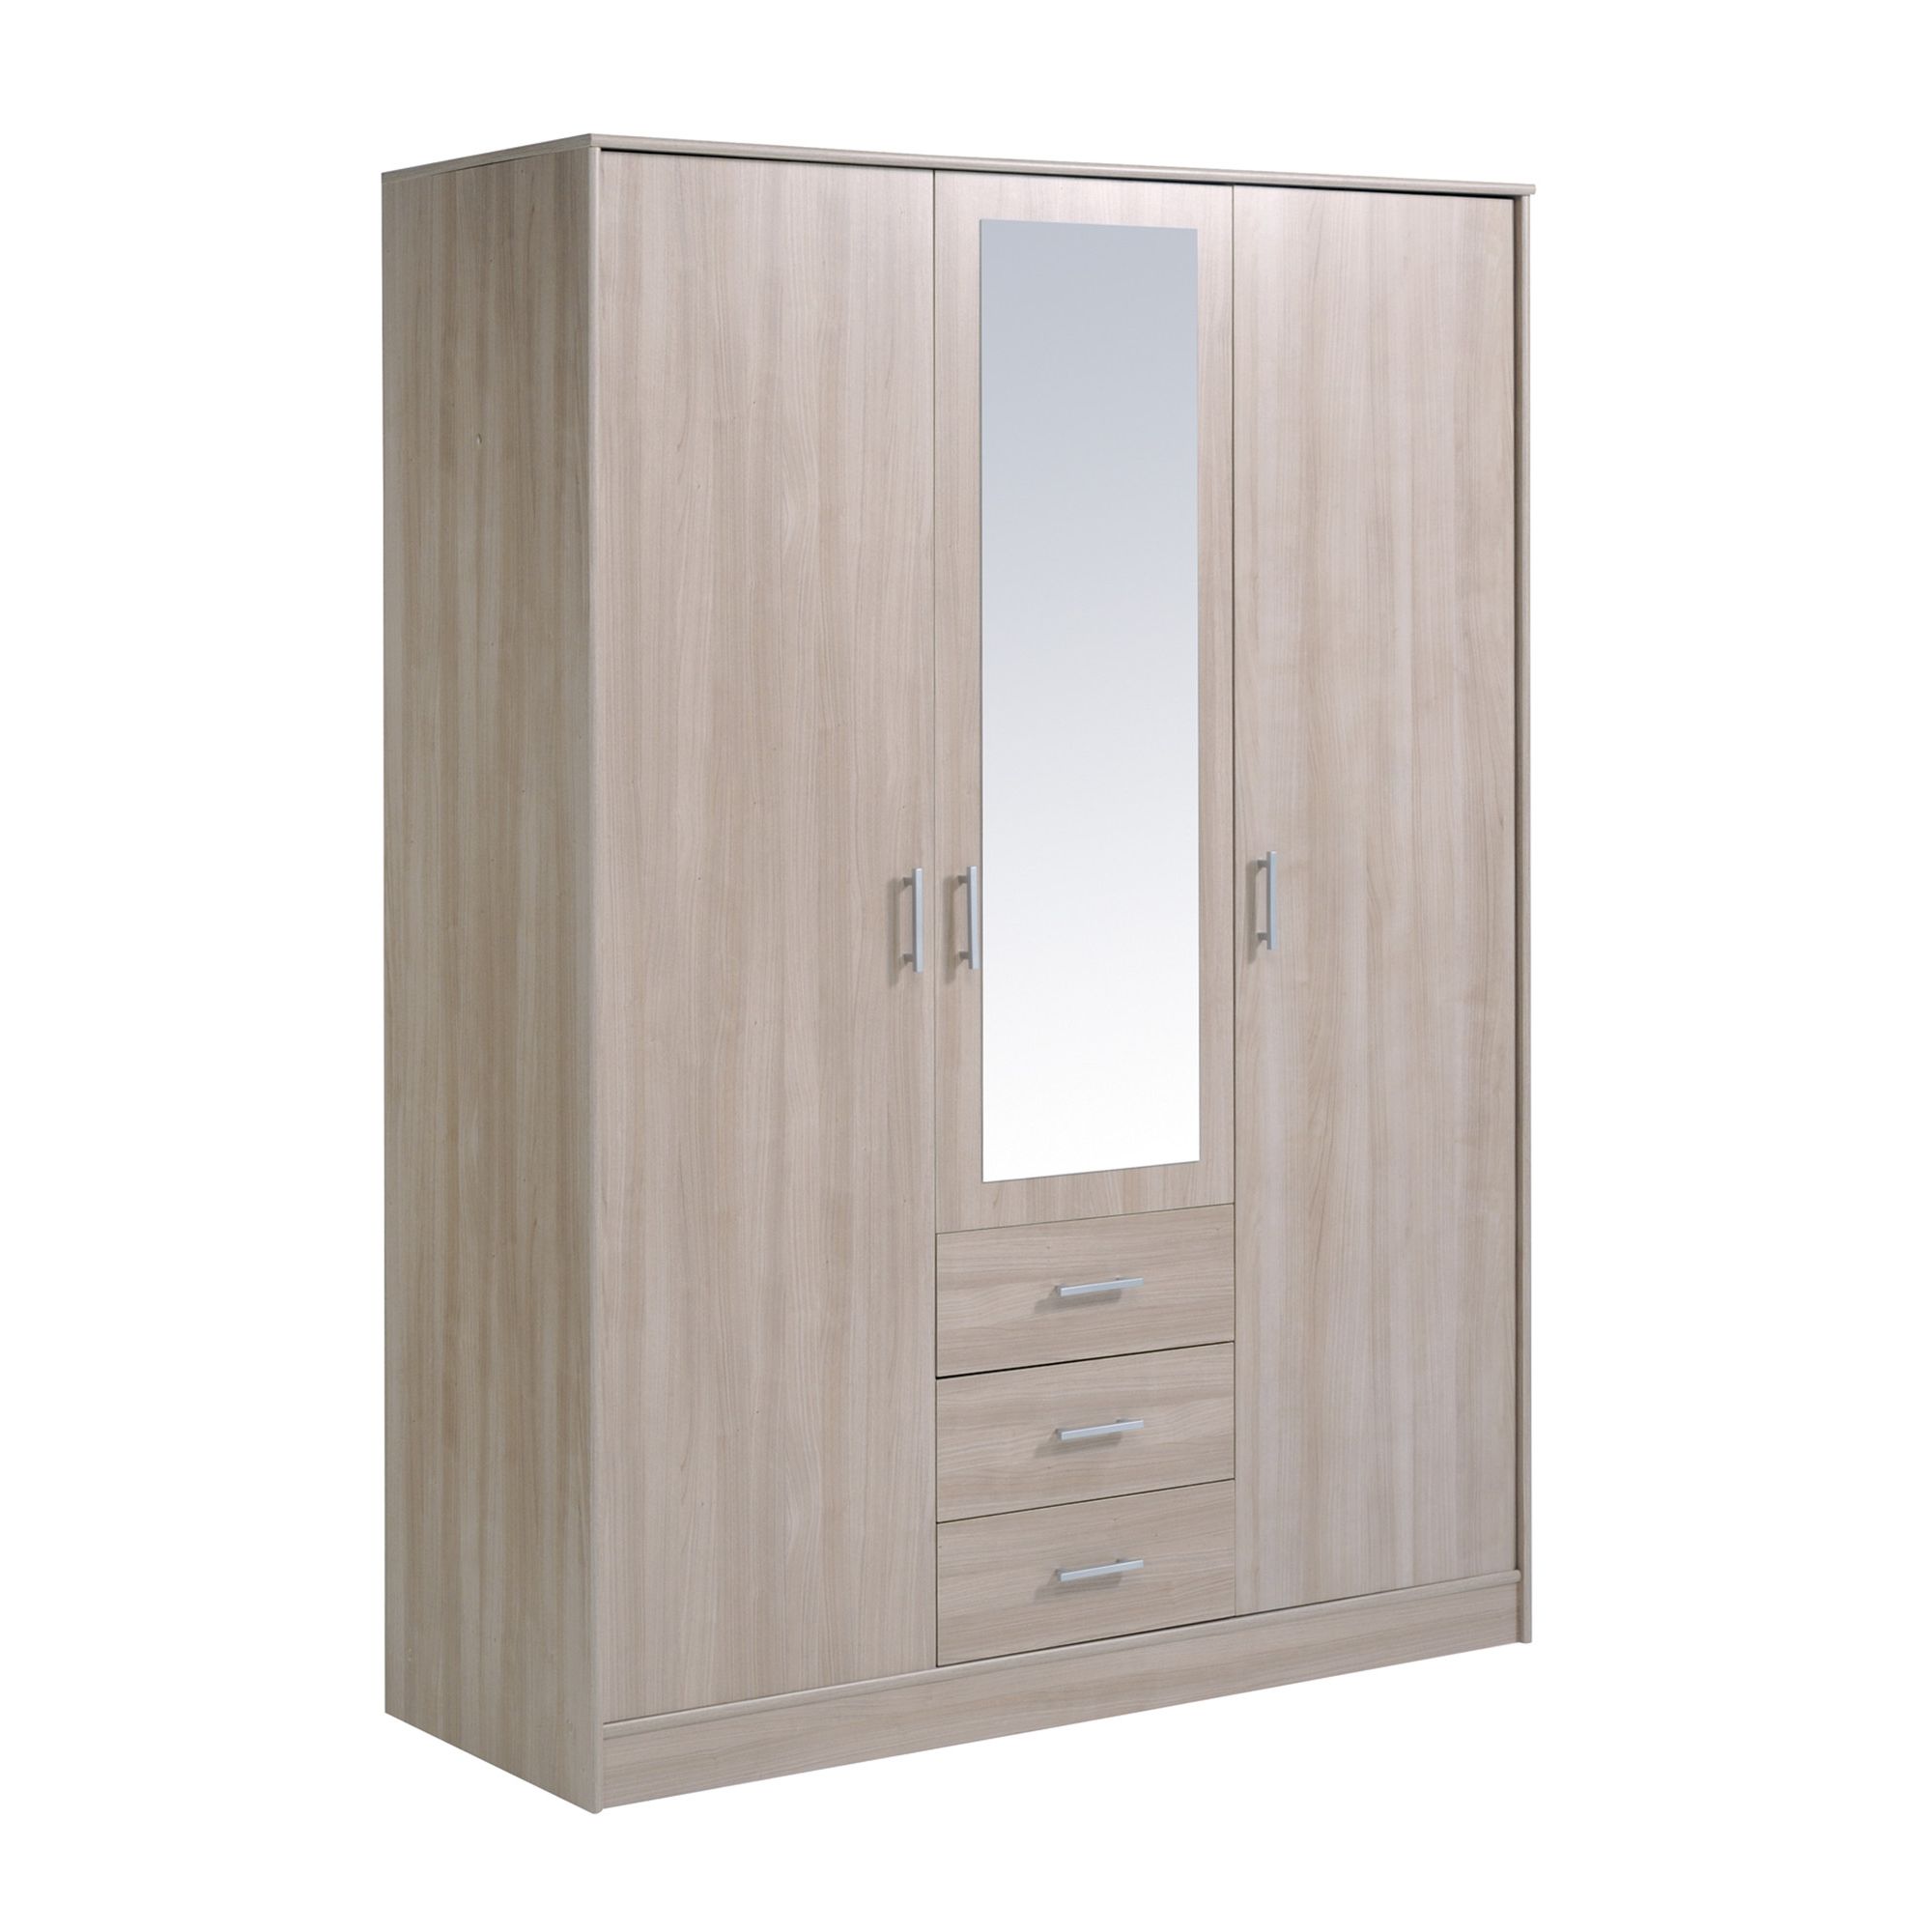 Parisot Essential Wardrobe with 3 Doors and 3 Drawers - Bruges at Tescos Direct